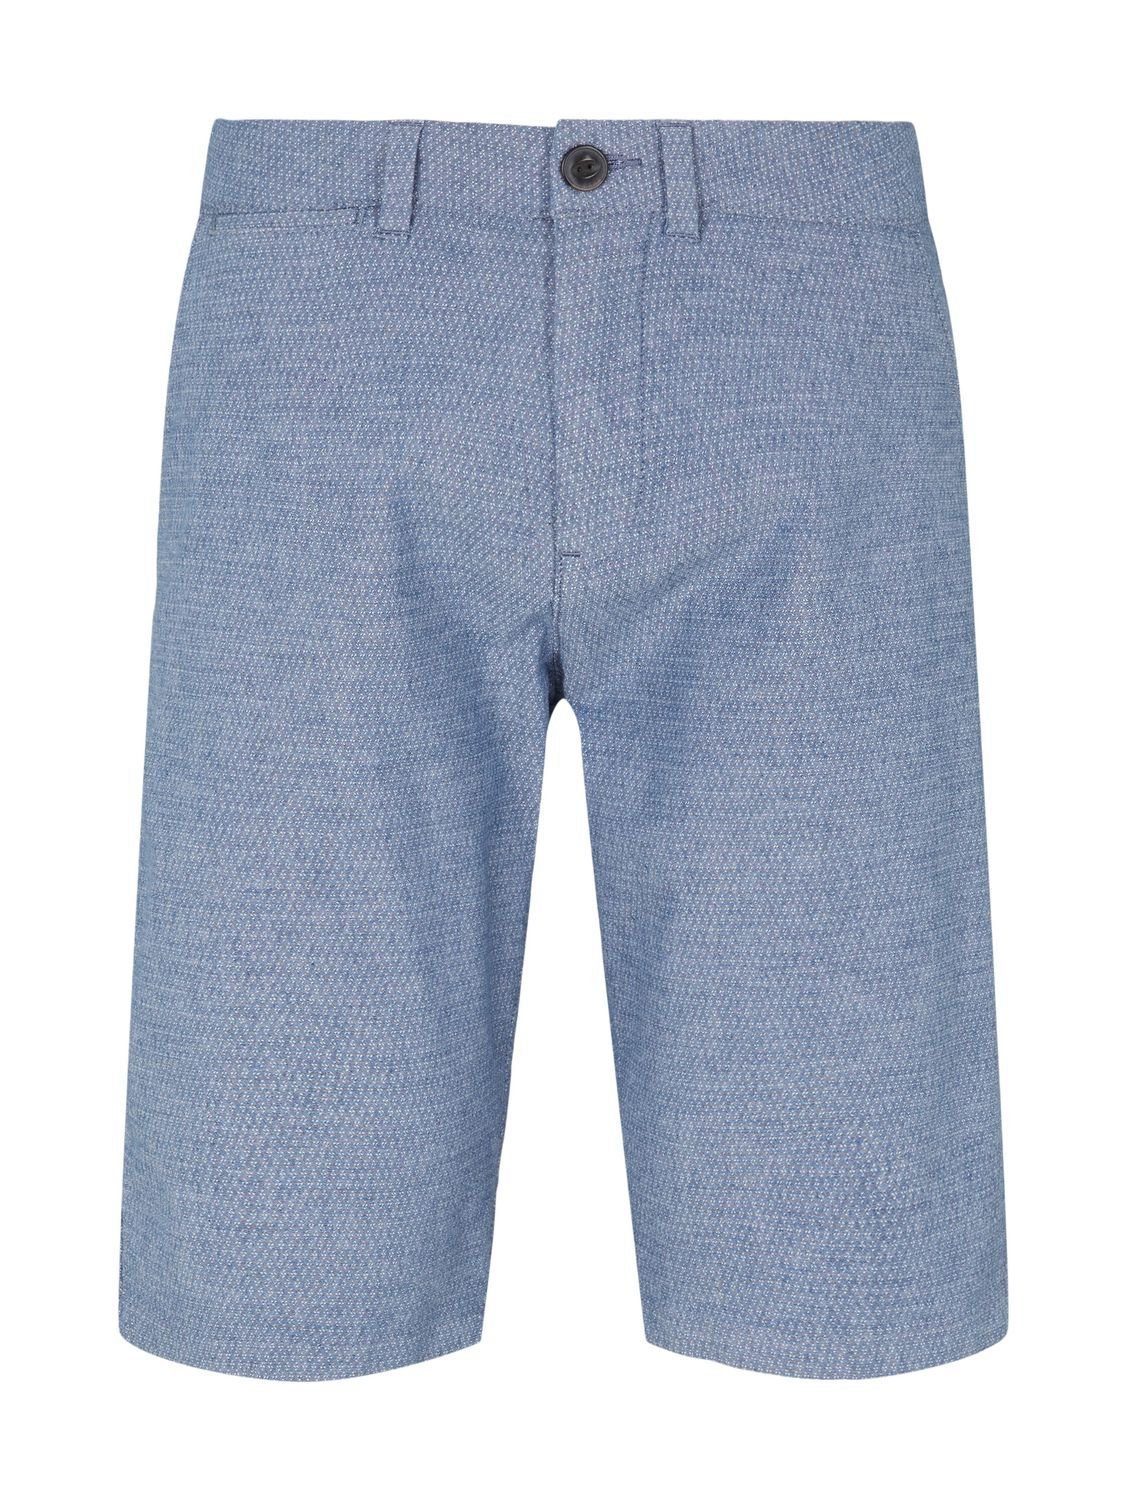 TOM TAILOR Shorts STRUCTURED mit Stretch Chambray Look Dobby 29300